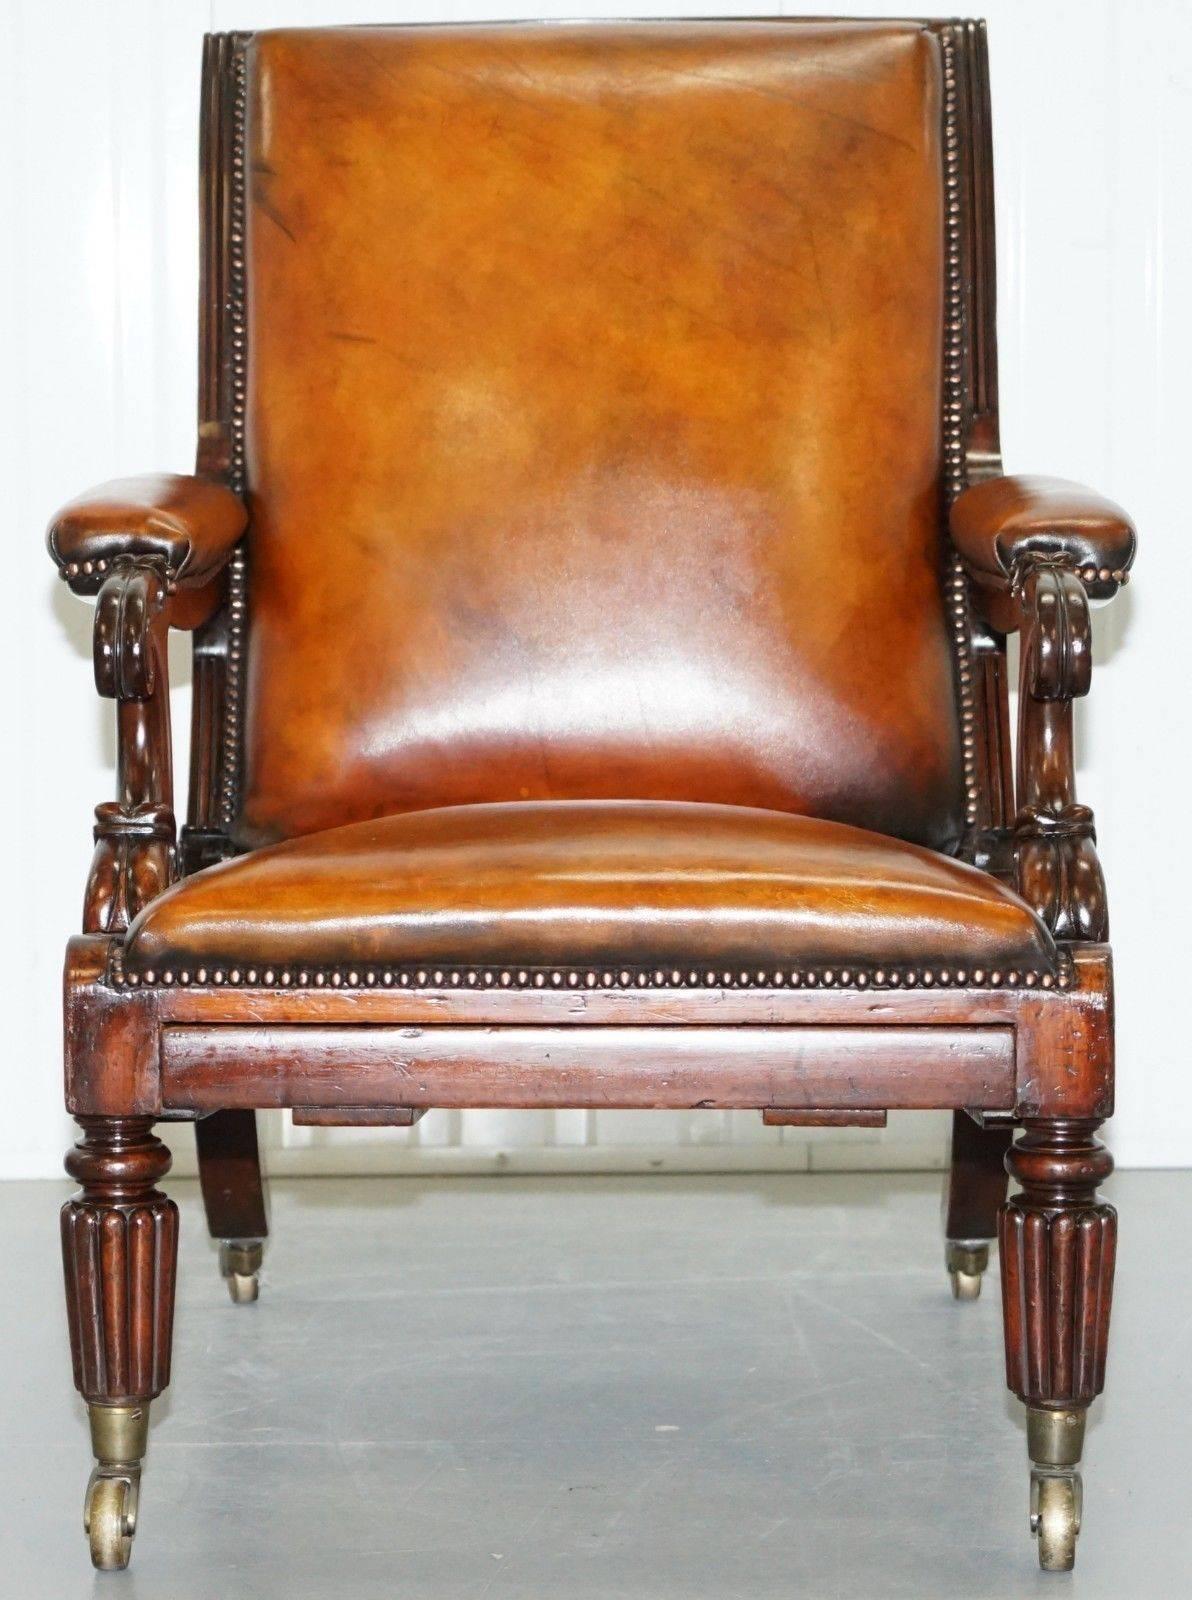 We are delighted to offer for sale this absolutely stunning 100% period correct William IV circa 1835 mahogany reclining library reading armchair with built in footrest

This chair is a wonder to behold, the reclining action is operated by two